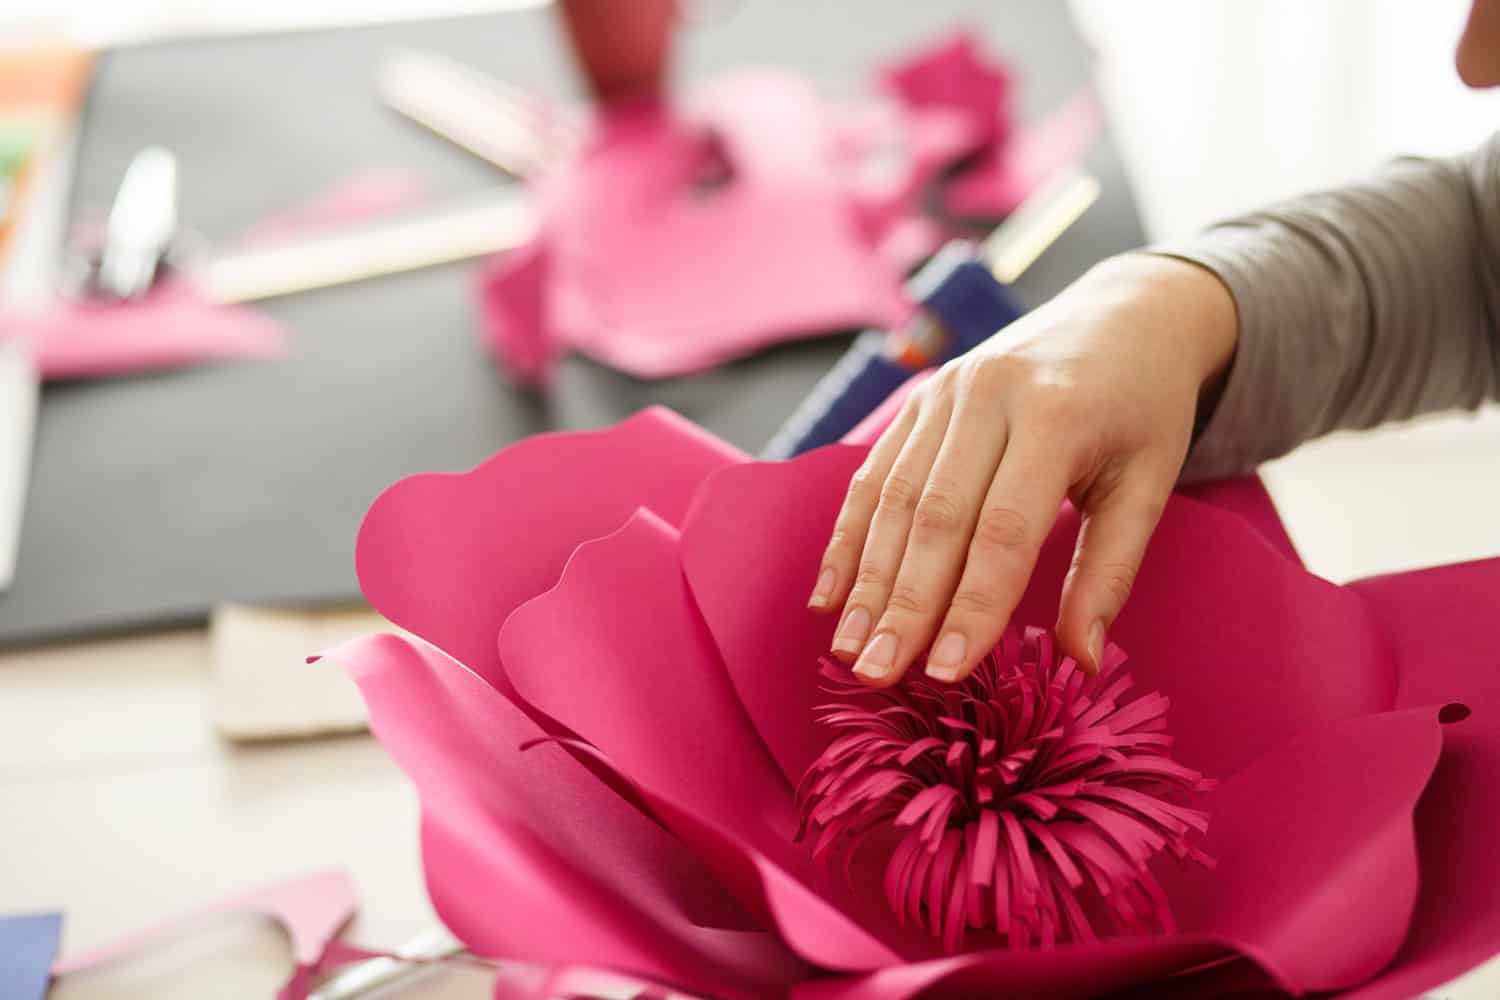 Female creating a beautiful paper flower at her workstation using pink construction paper